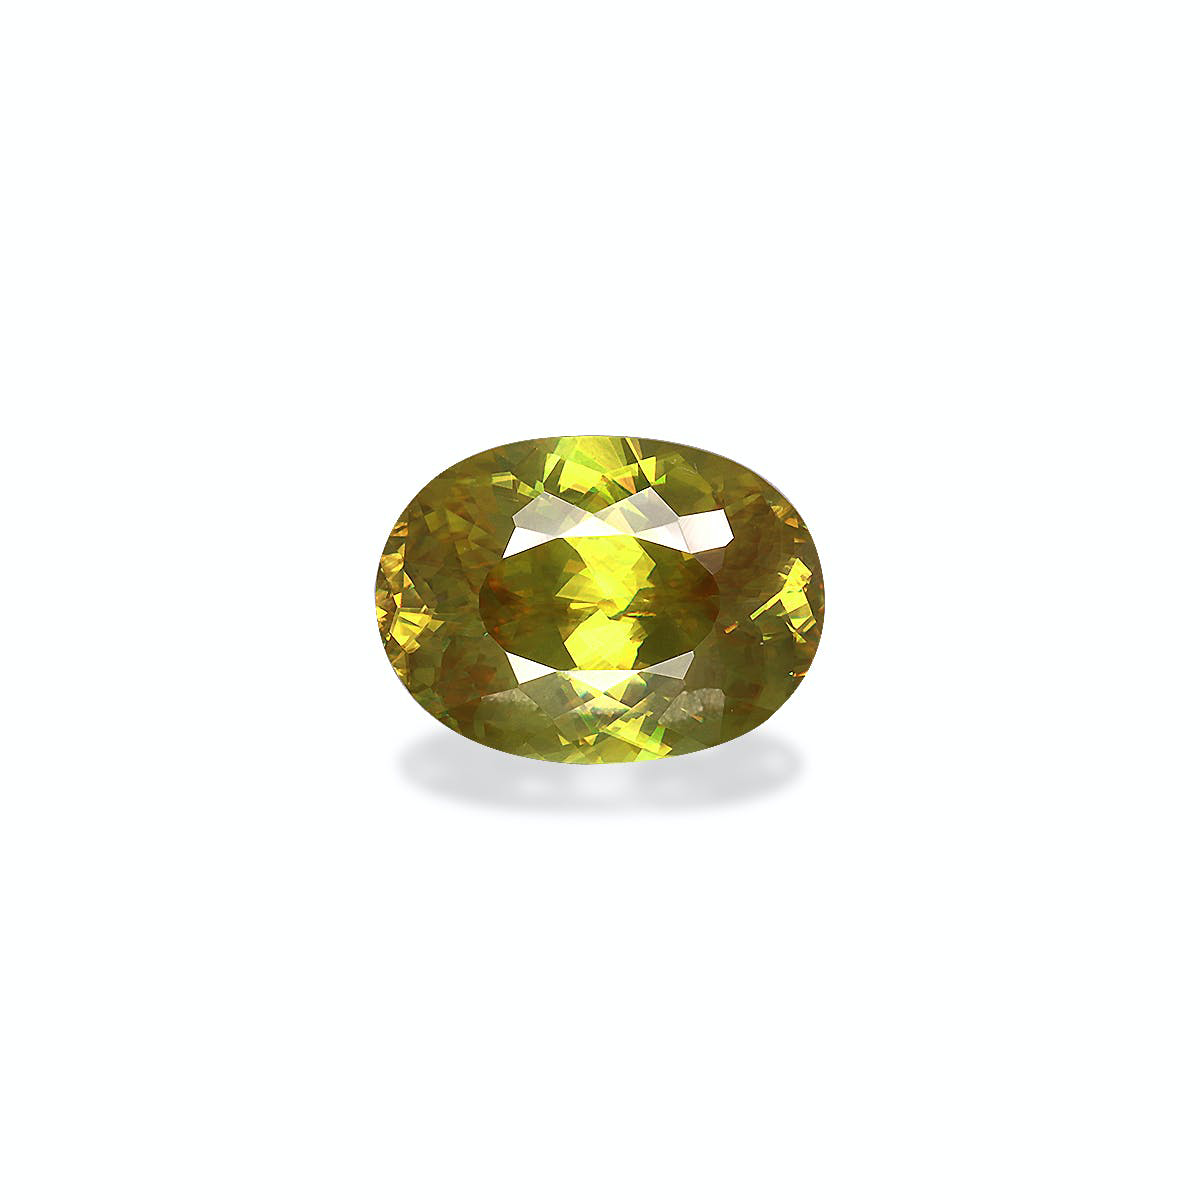 Picture of Green Sphene 5.28ct (SH0551)